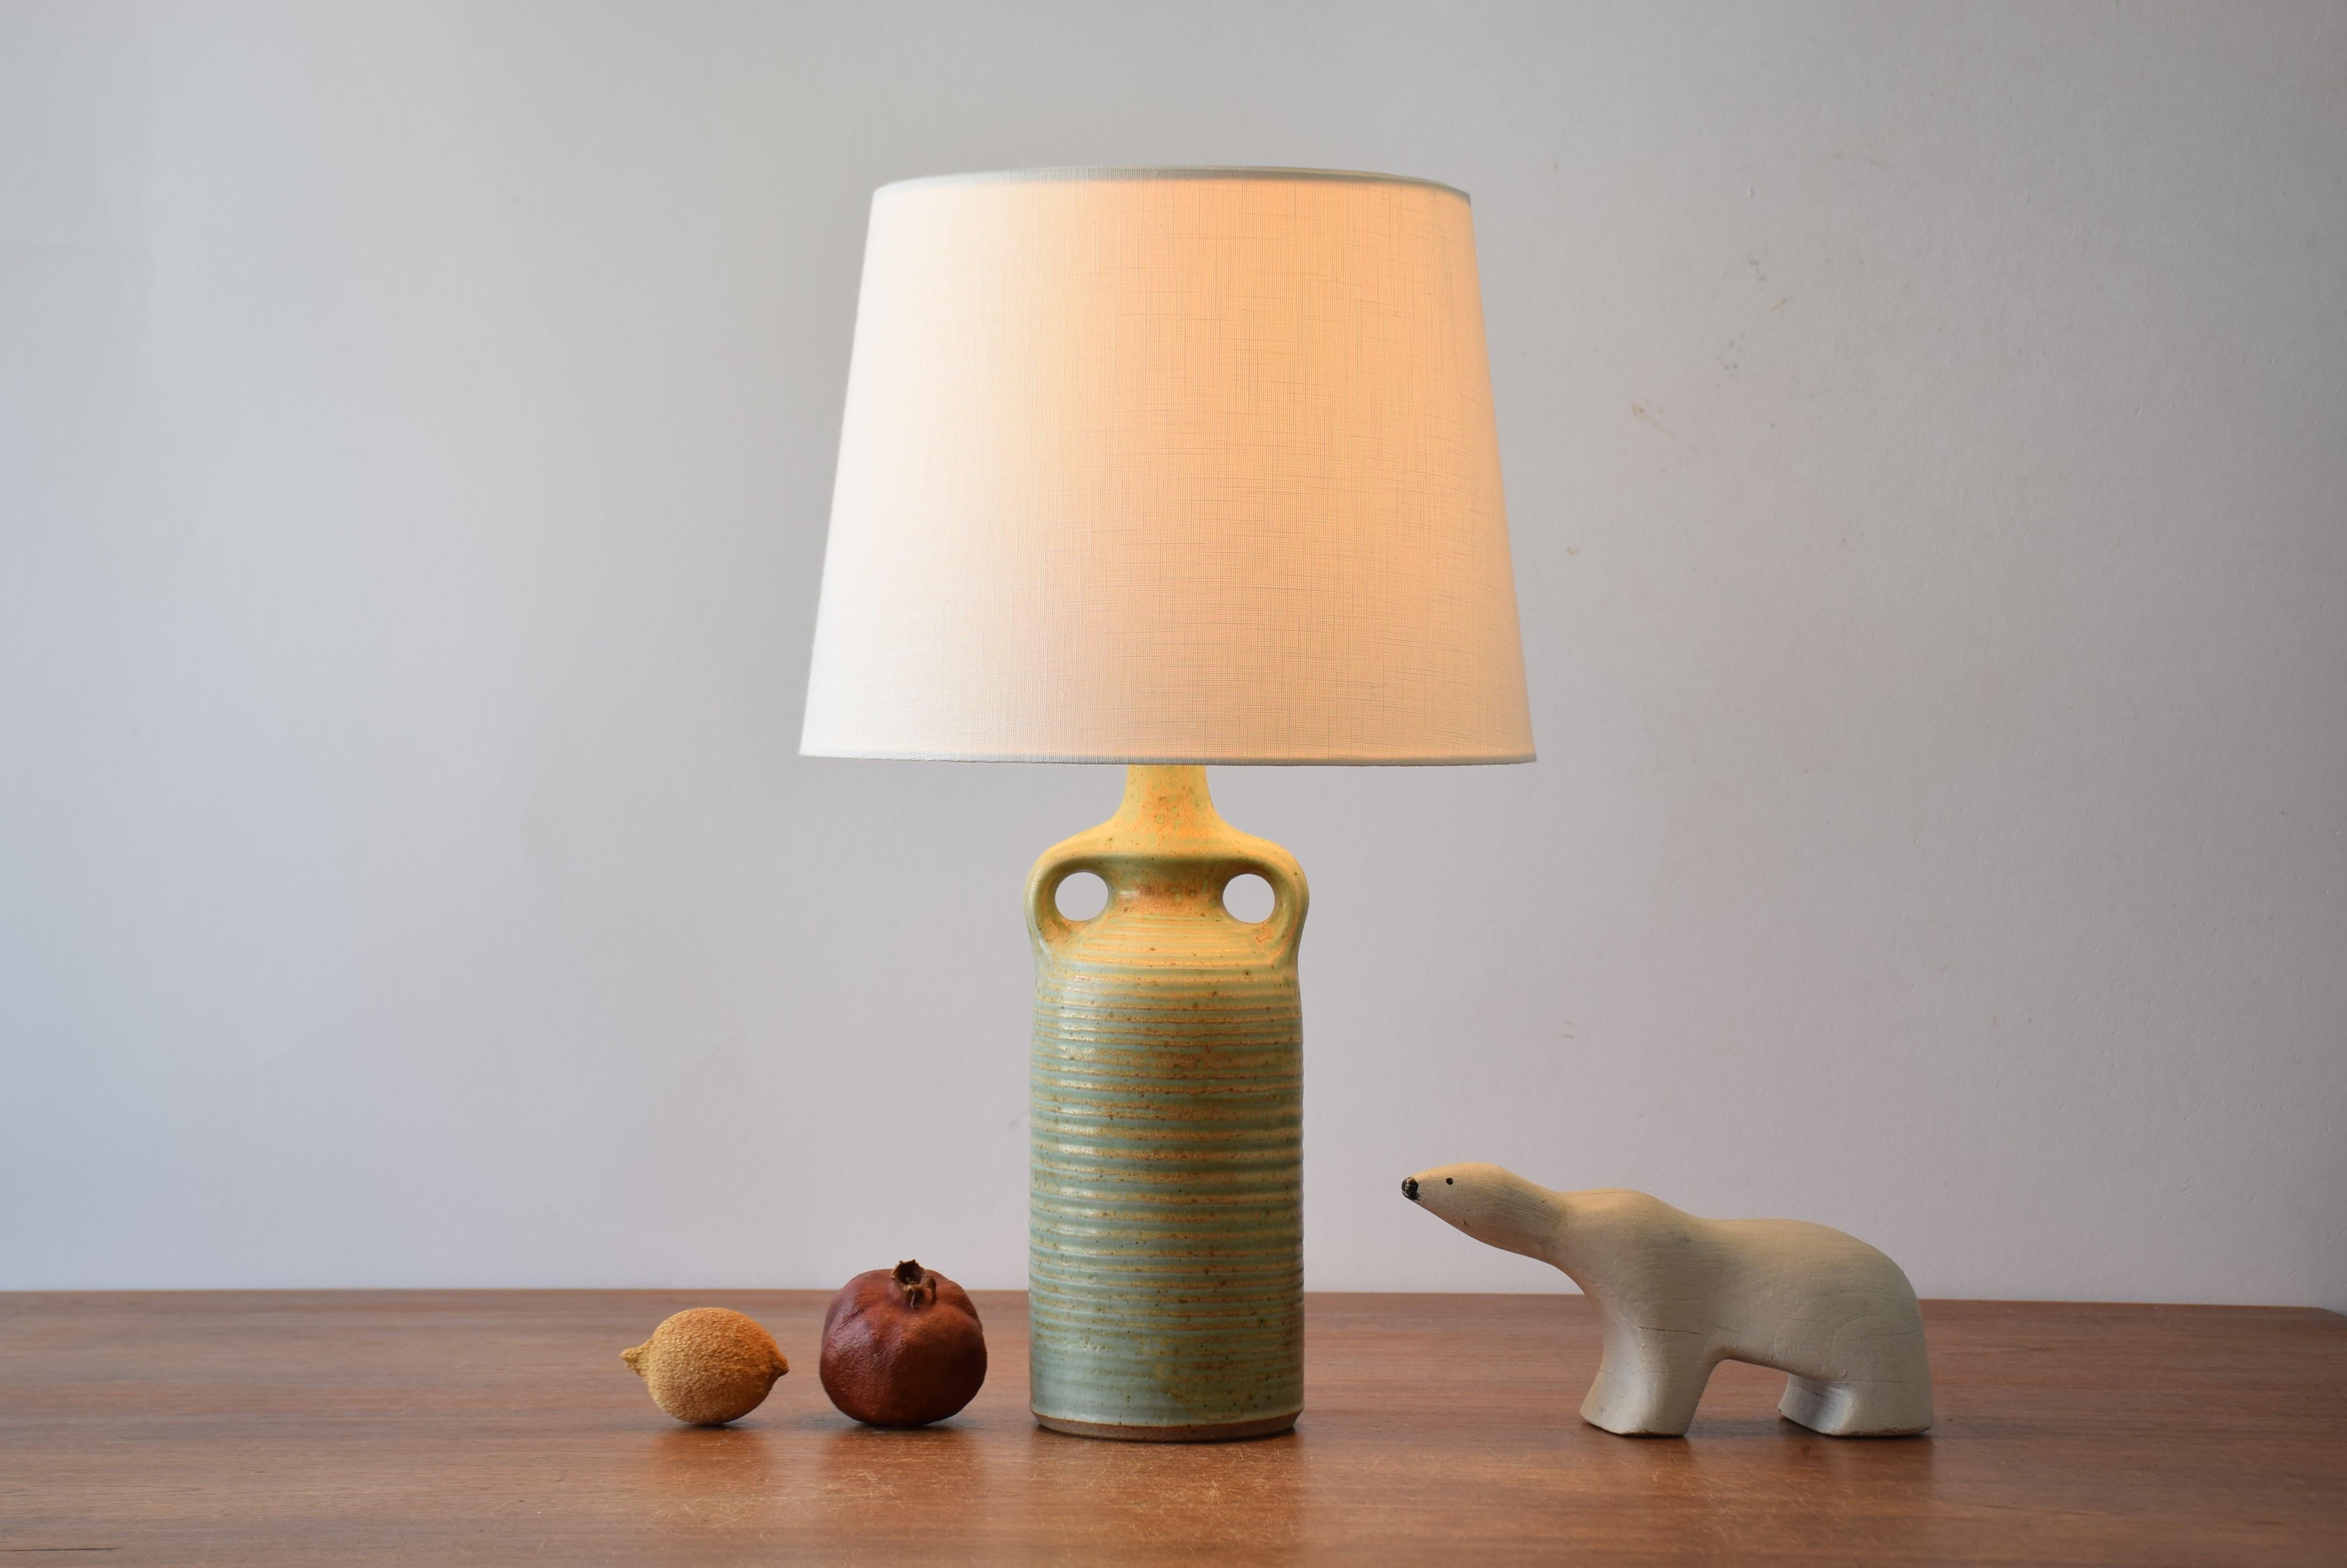 Stylish mid-century Danish table lamp from the ceramic workshop Knabstrup. Designed and made ca 1960s or 1970s.
The lampbase is made of stoneware and has a matte pale green glaze with ochre golden elements. It has a structured striped